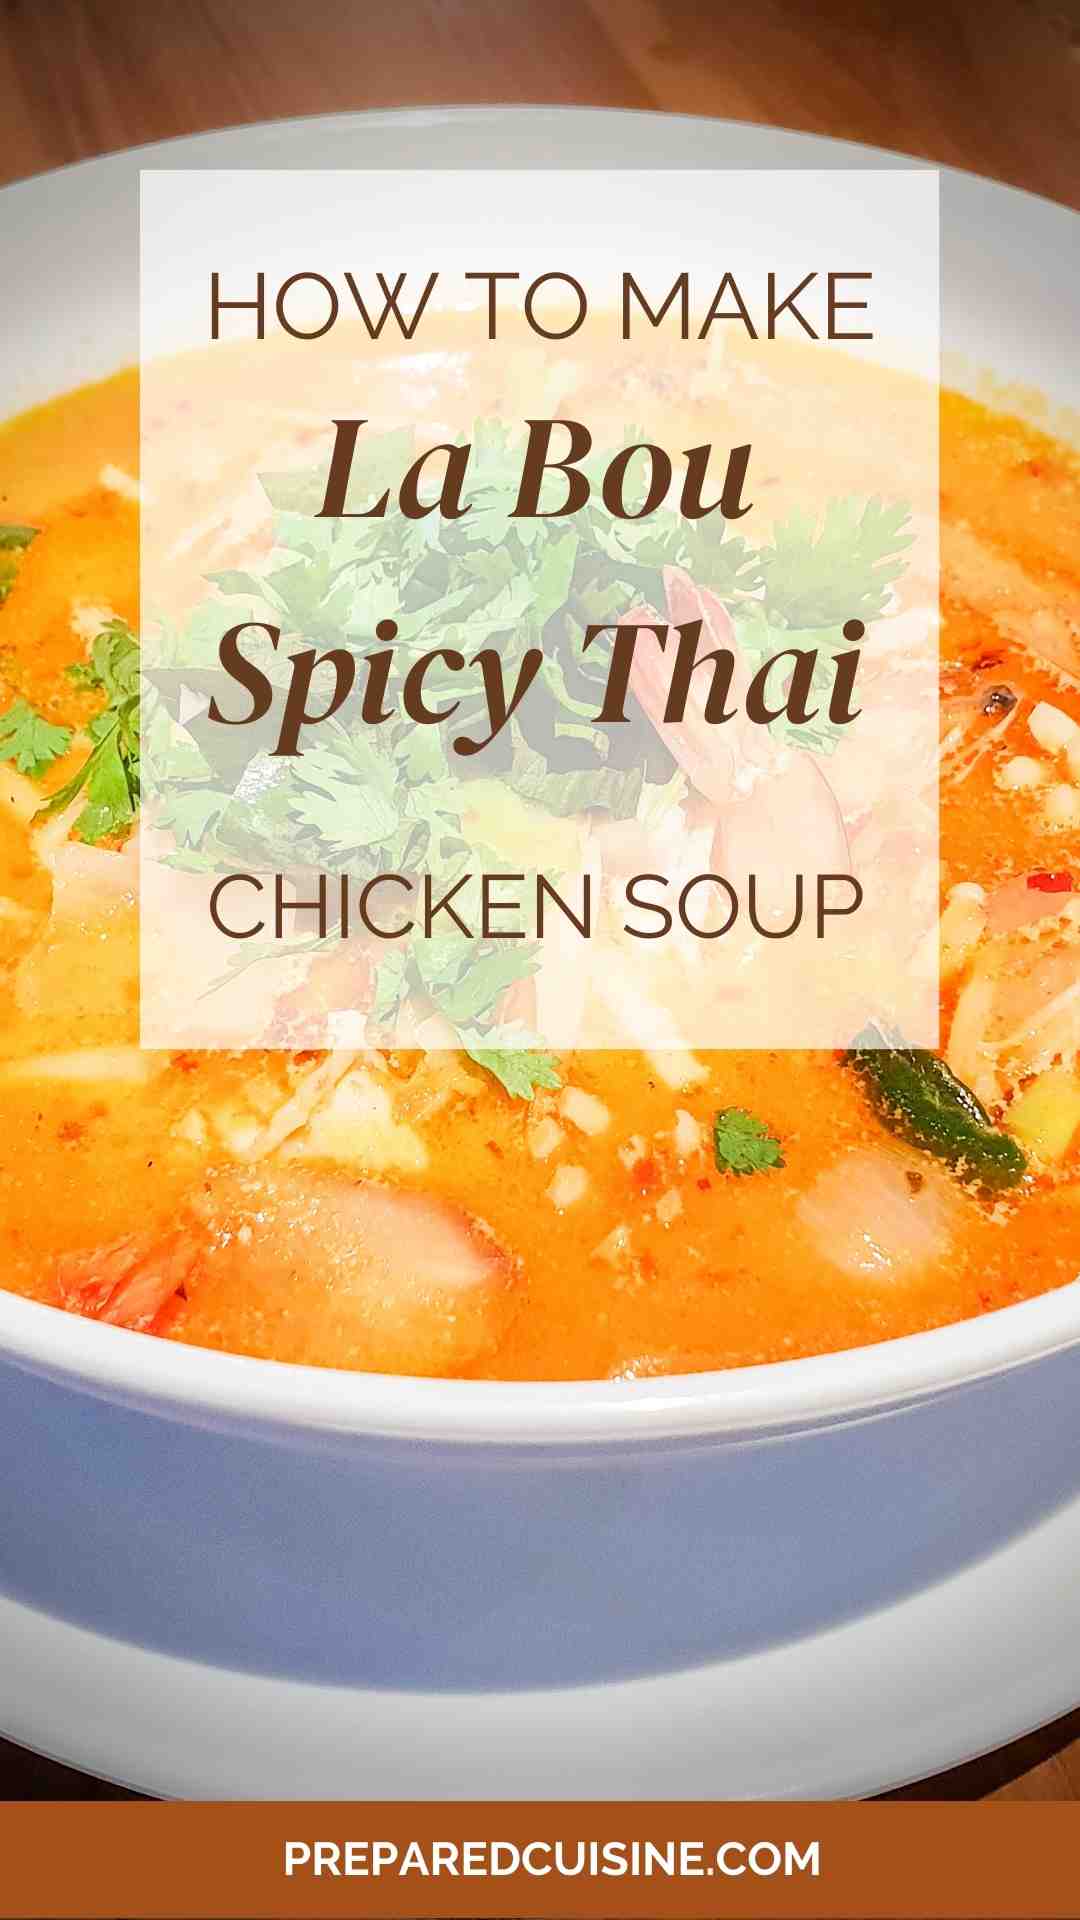 How To Make La Bou Spicy Thai Chicken Soup pin